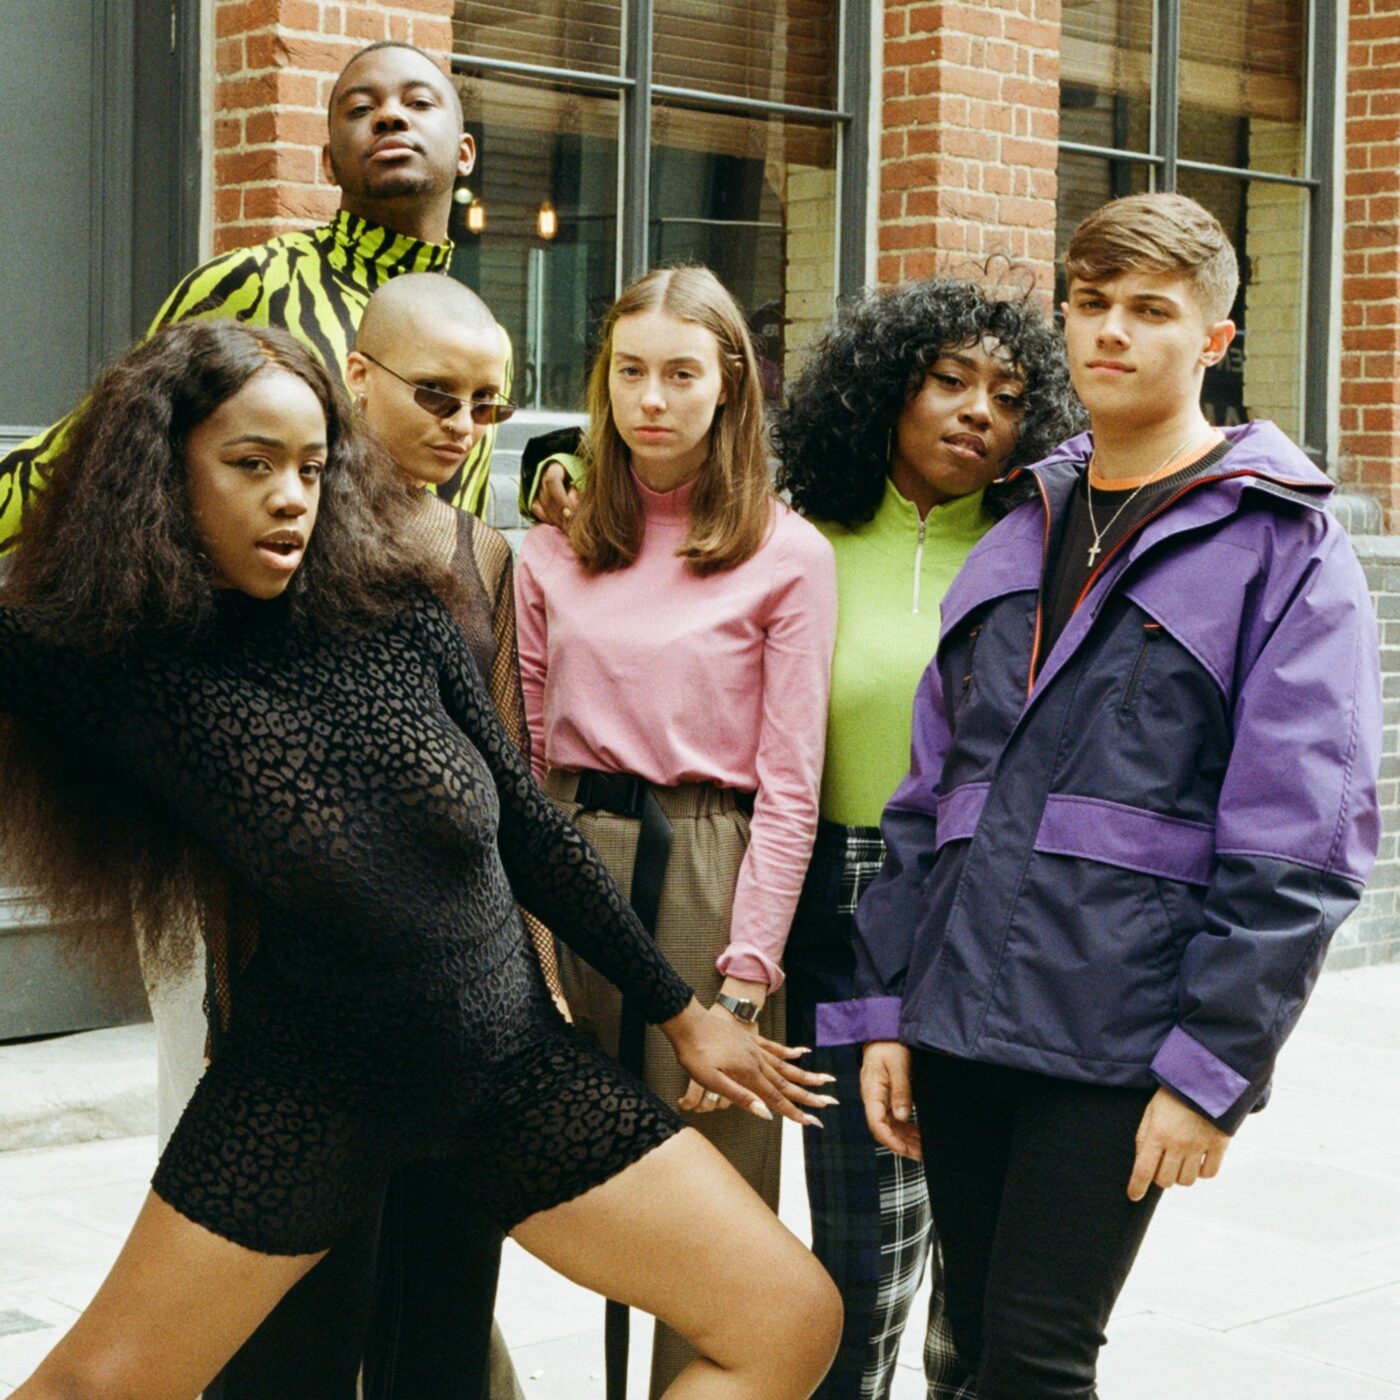 6 Reasons Why Gen Z Want More Inclusivity in Fashion - Voxburner